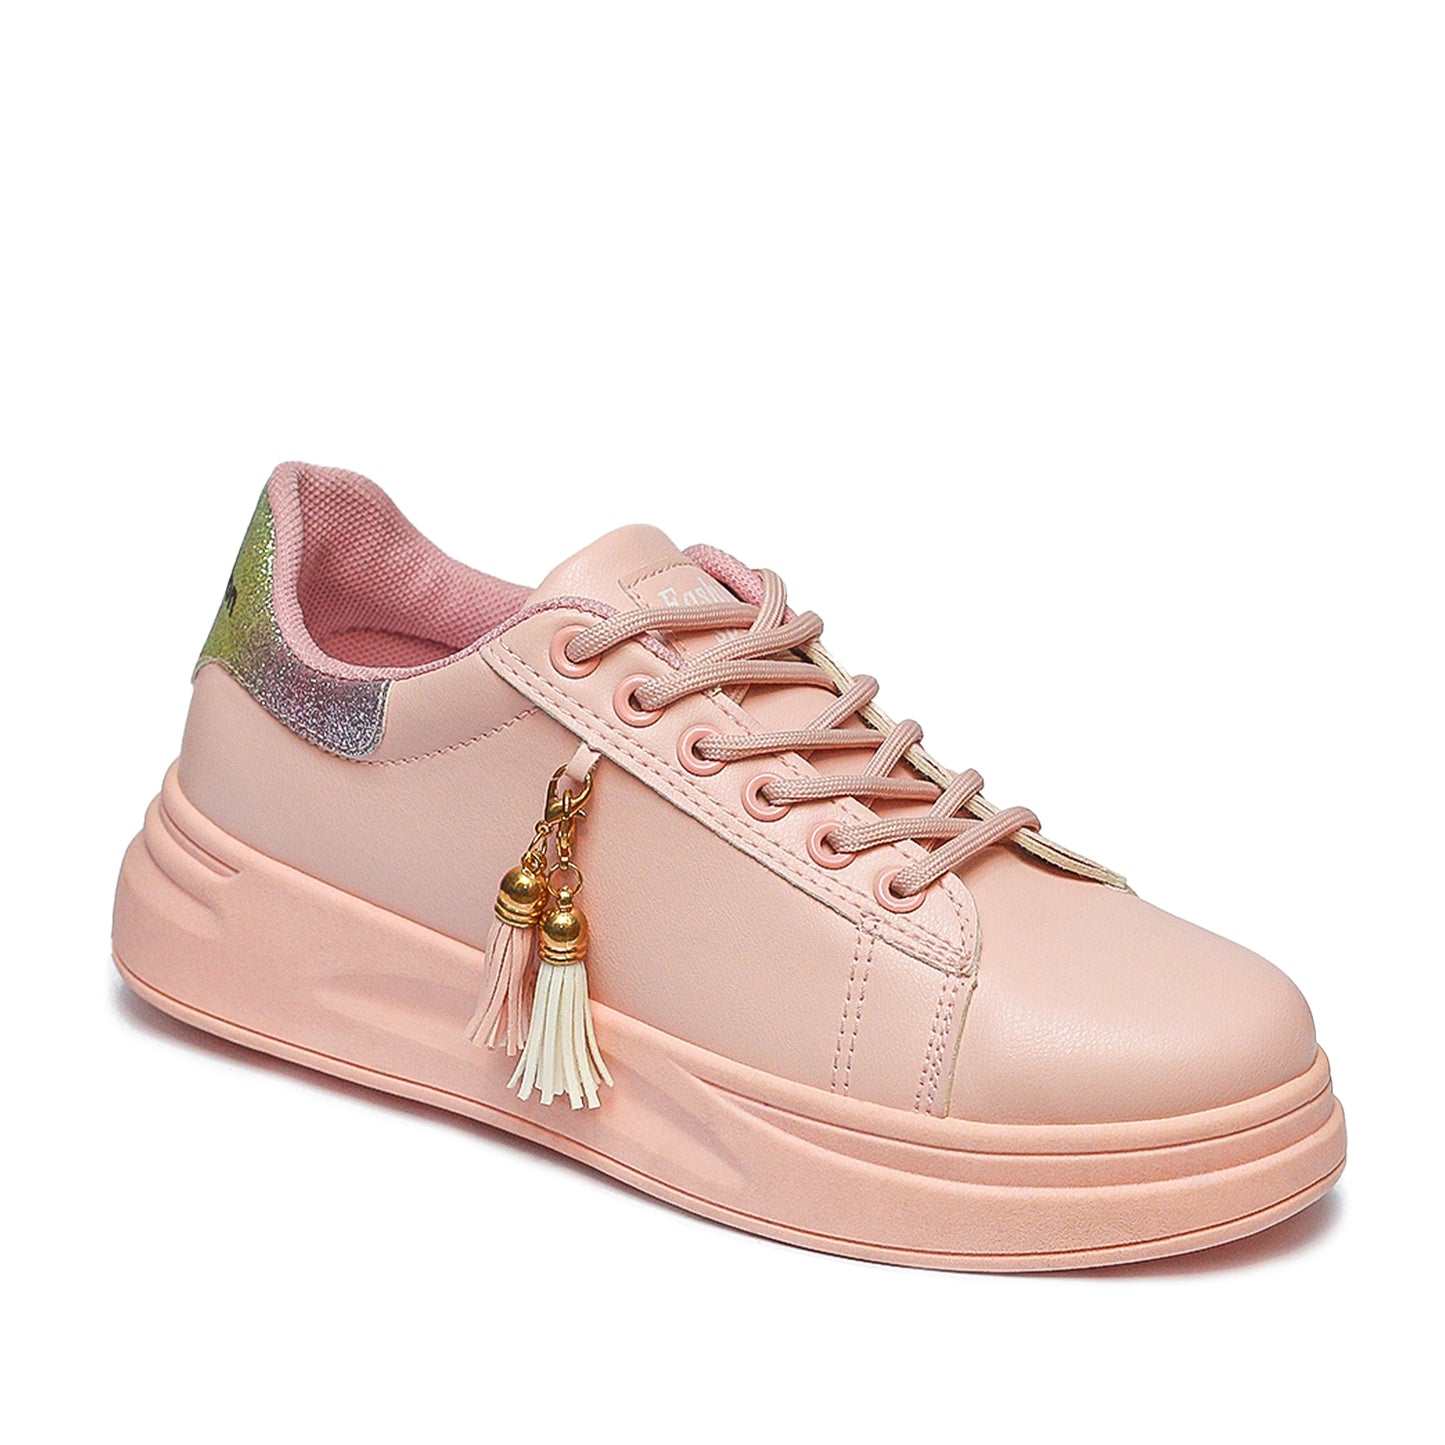 Simple Pink Sneakers For Girls